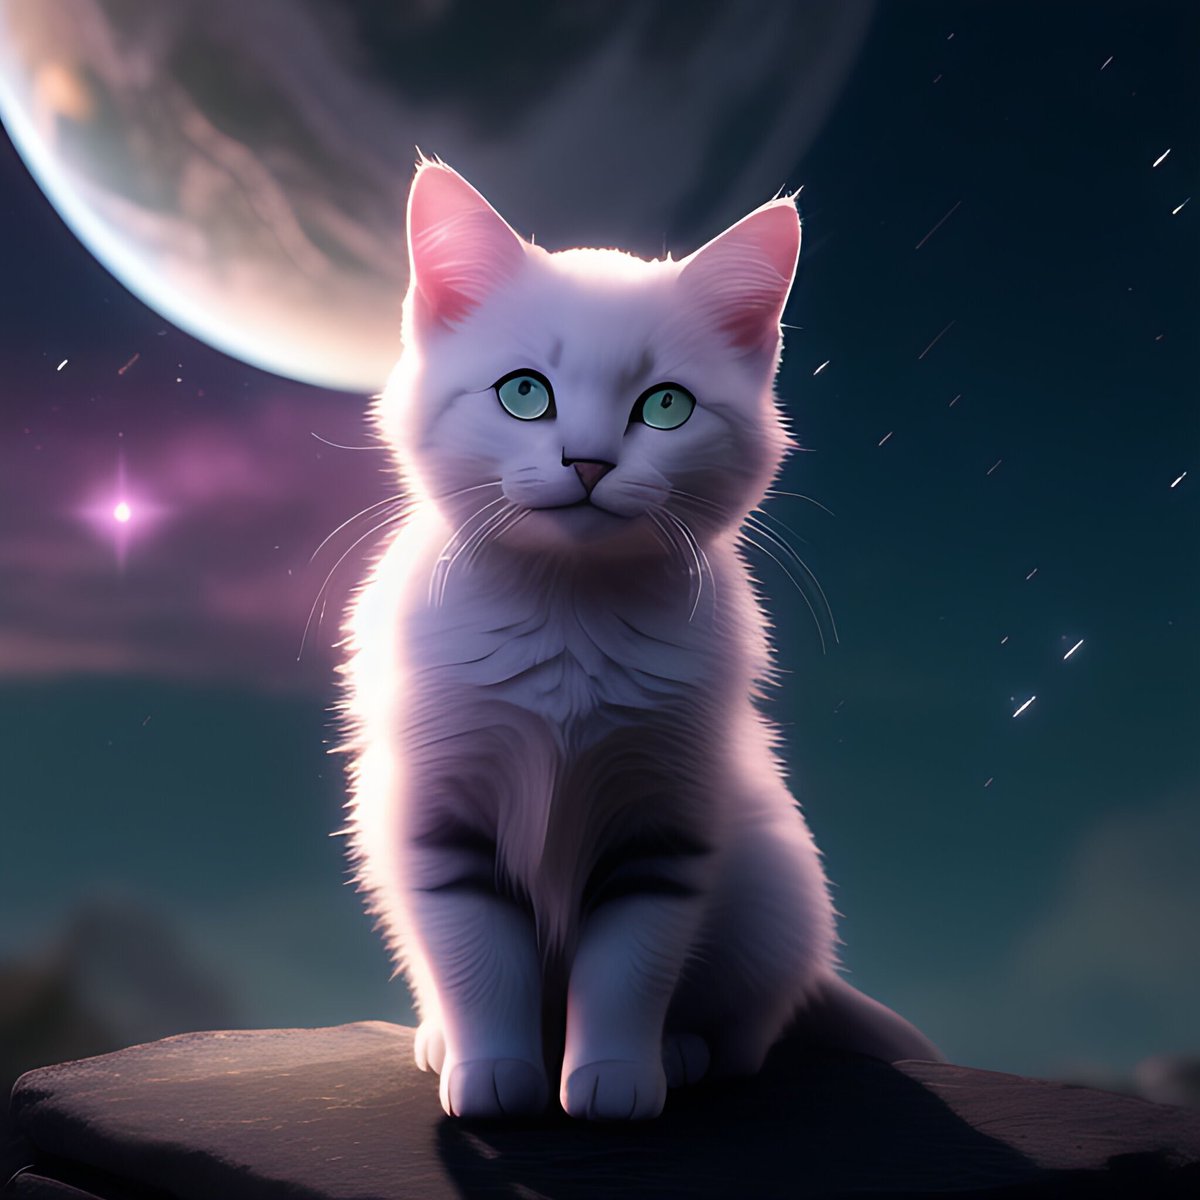 ✨ Good night, X! 💕

🌙 Time to recharge for more adventures.

And speaking of adventures..

🚀 Look who's exploring the cosmos tonight… 

– a cute kitty in space! 😺🌌 

Good night, everyone, and dream of adventures among the stars. ✨ 
#KittyInSpace #GoodNight #CosmicDreams…